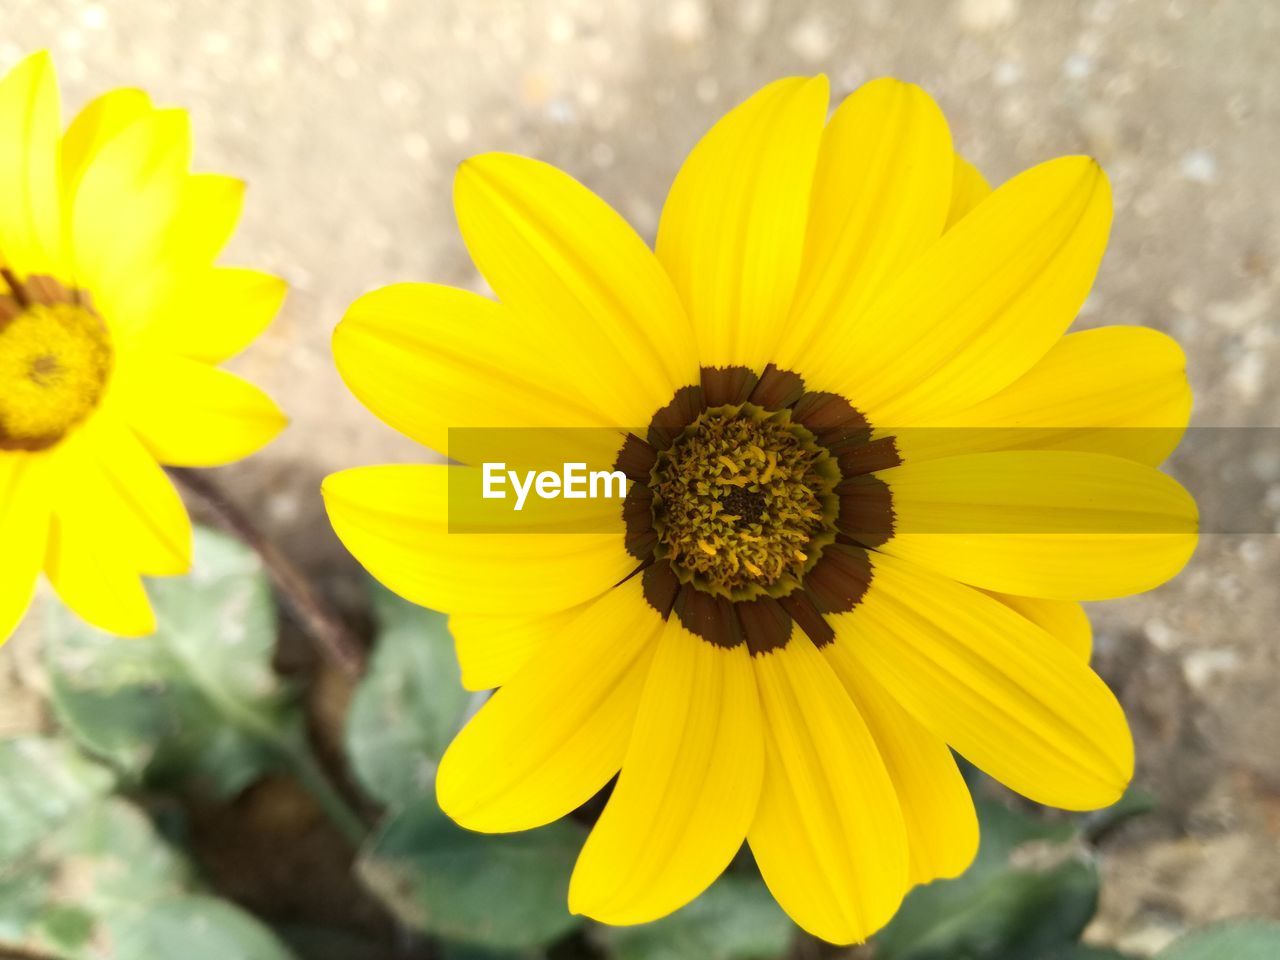 CLOSE-UP OF YELLOW FLOWER BLOOMING